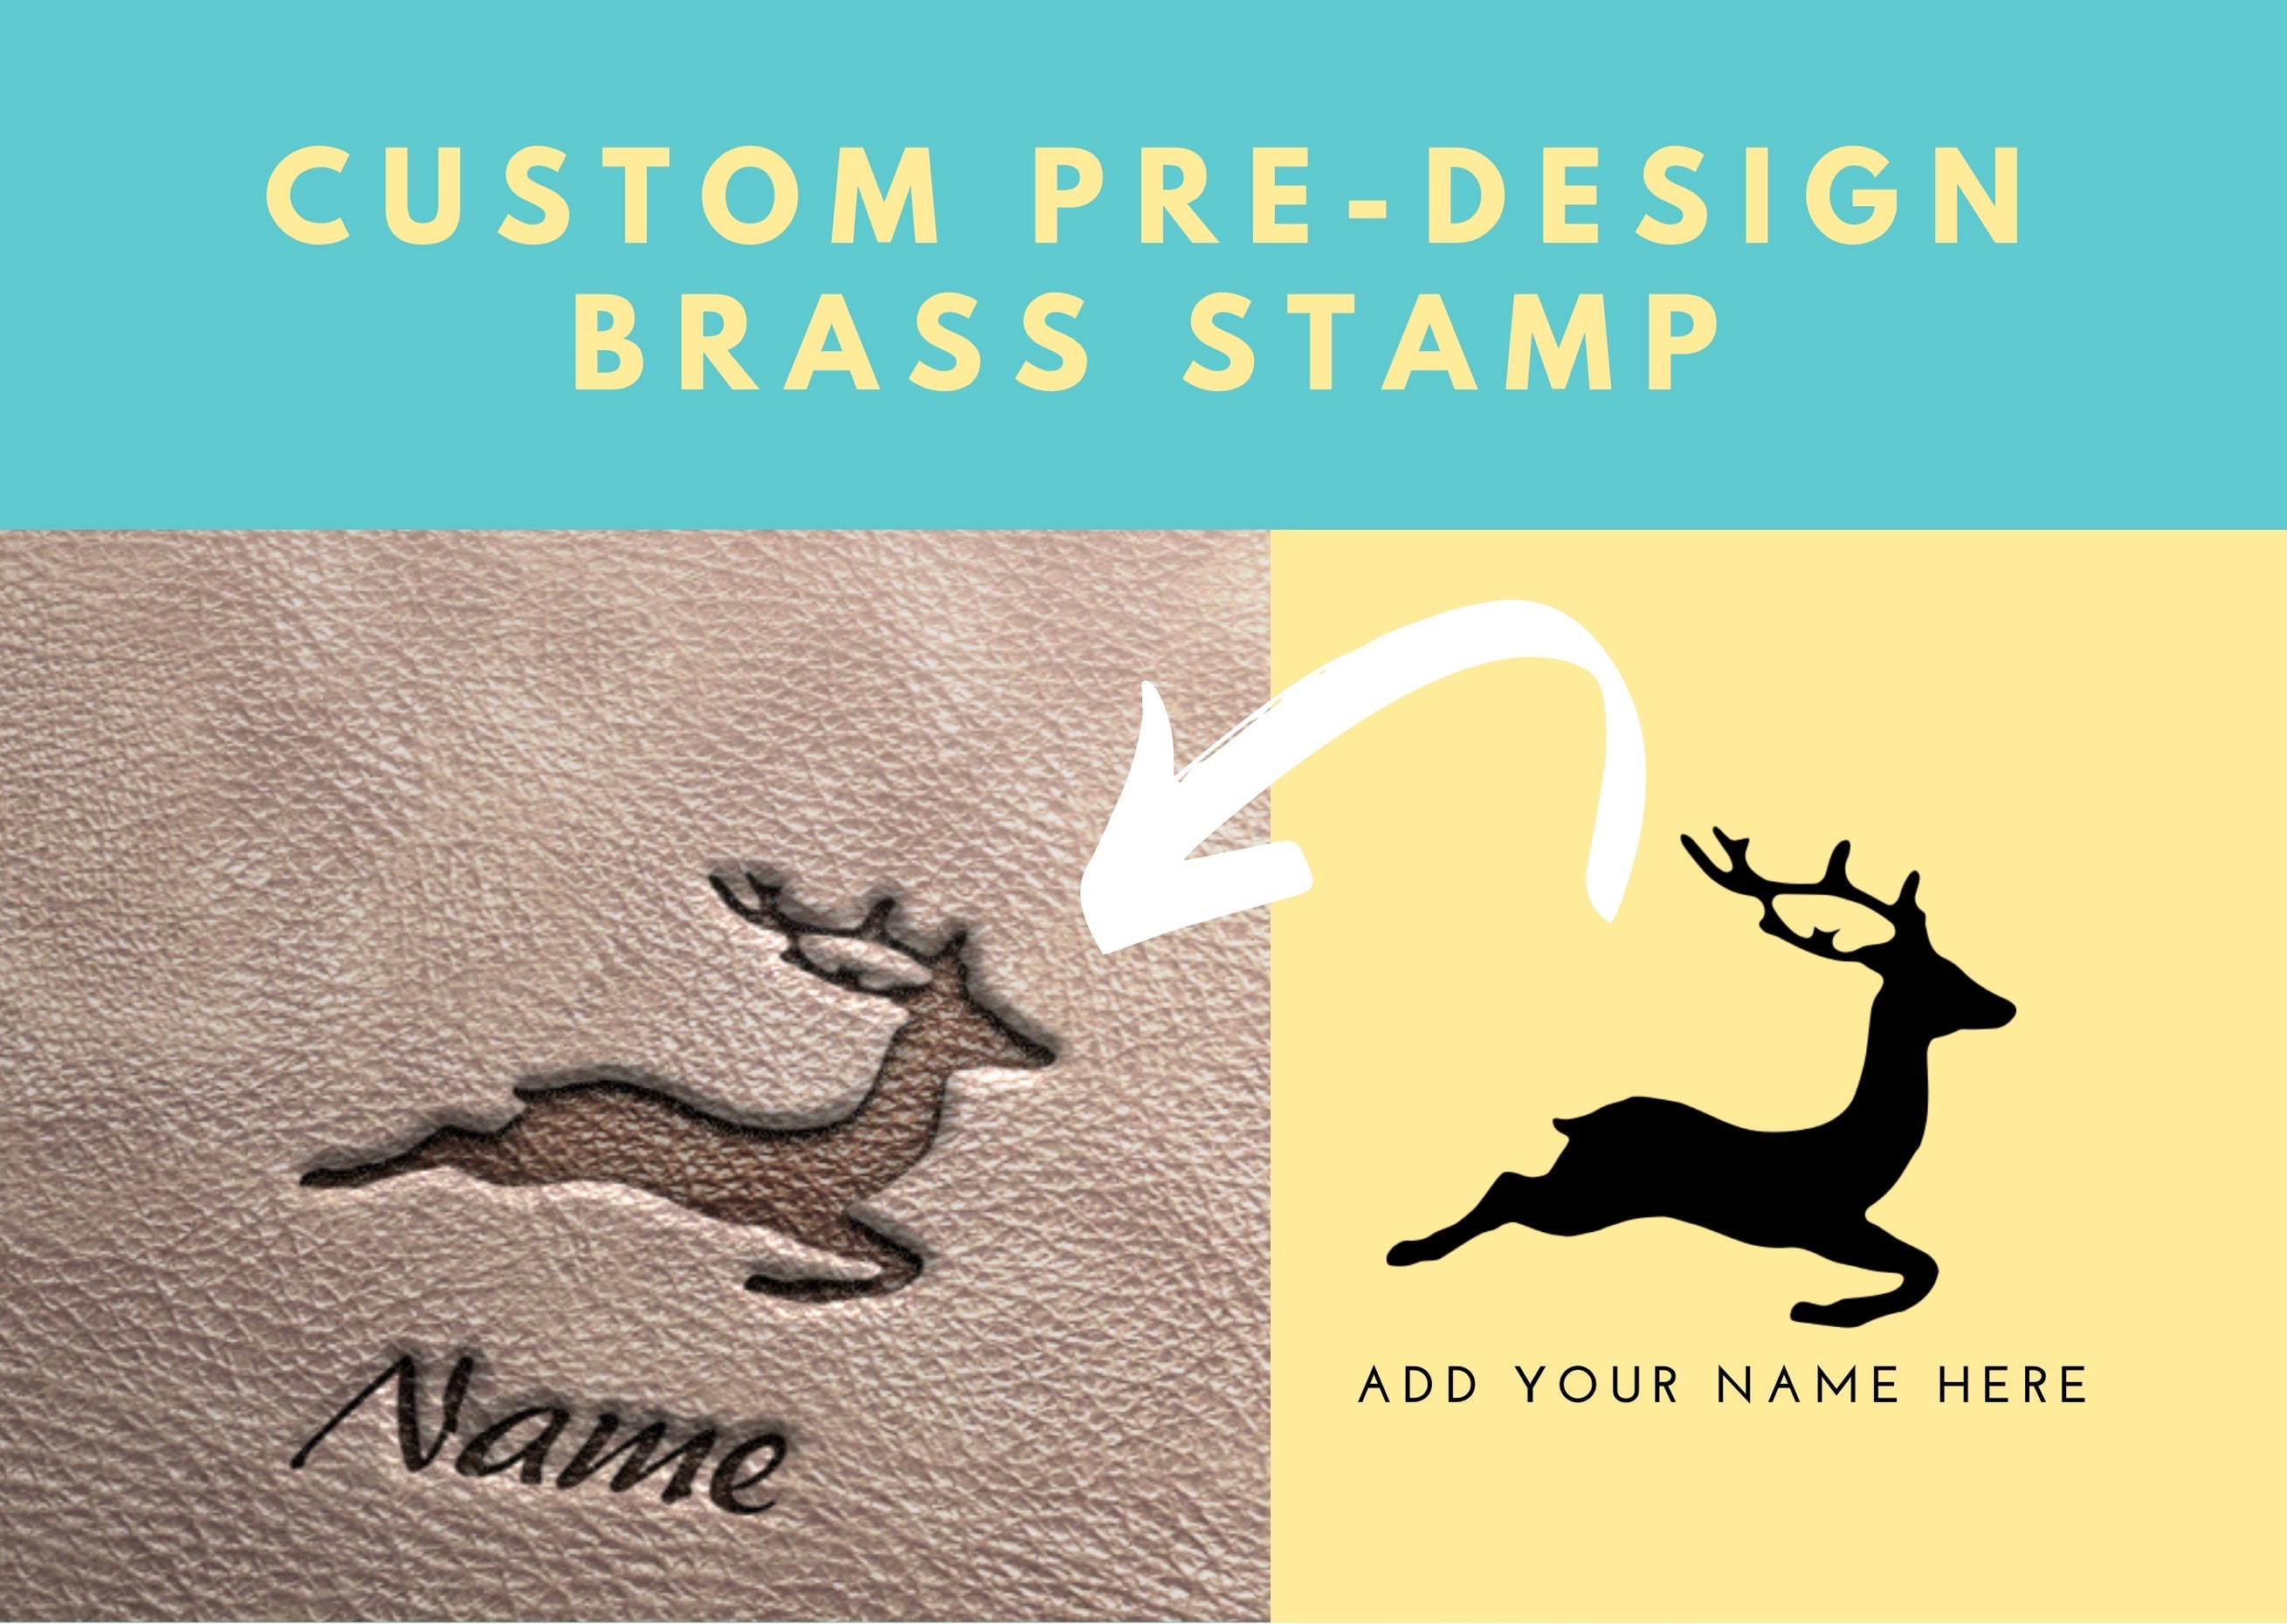 Custom Embosser leather stamp - create your logo brass seal stamp - leather  tools Custom mold hand knock mold wood food cake iron tools